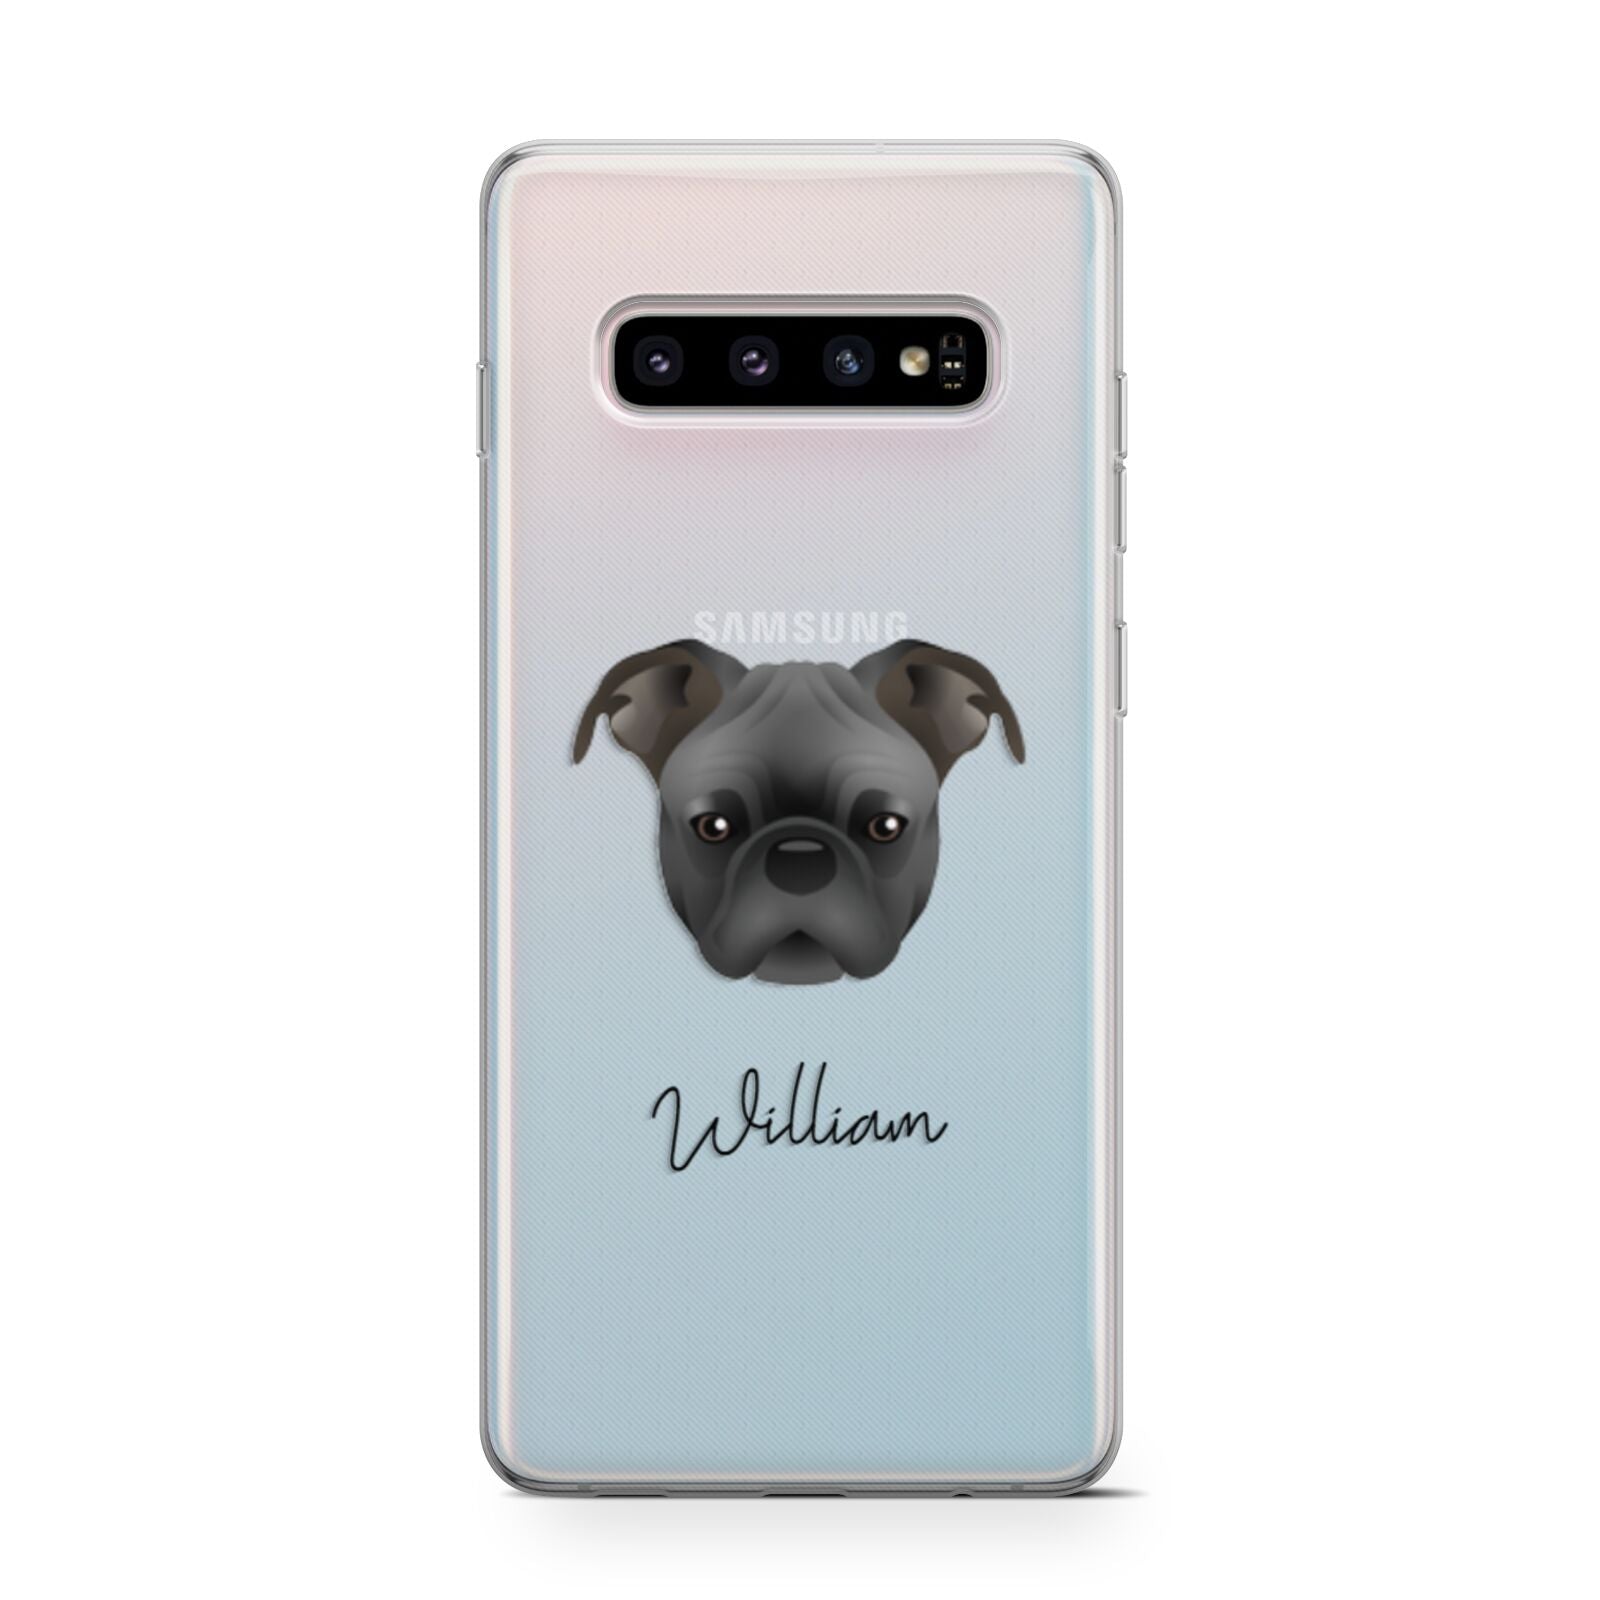 Bugg Personalised Samsung Galaxy S10 Case